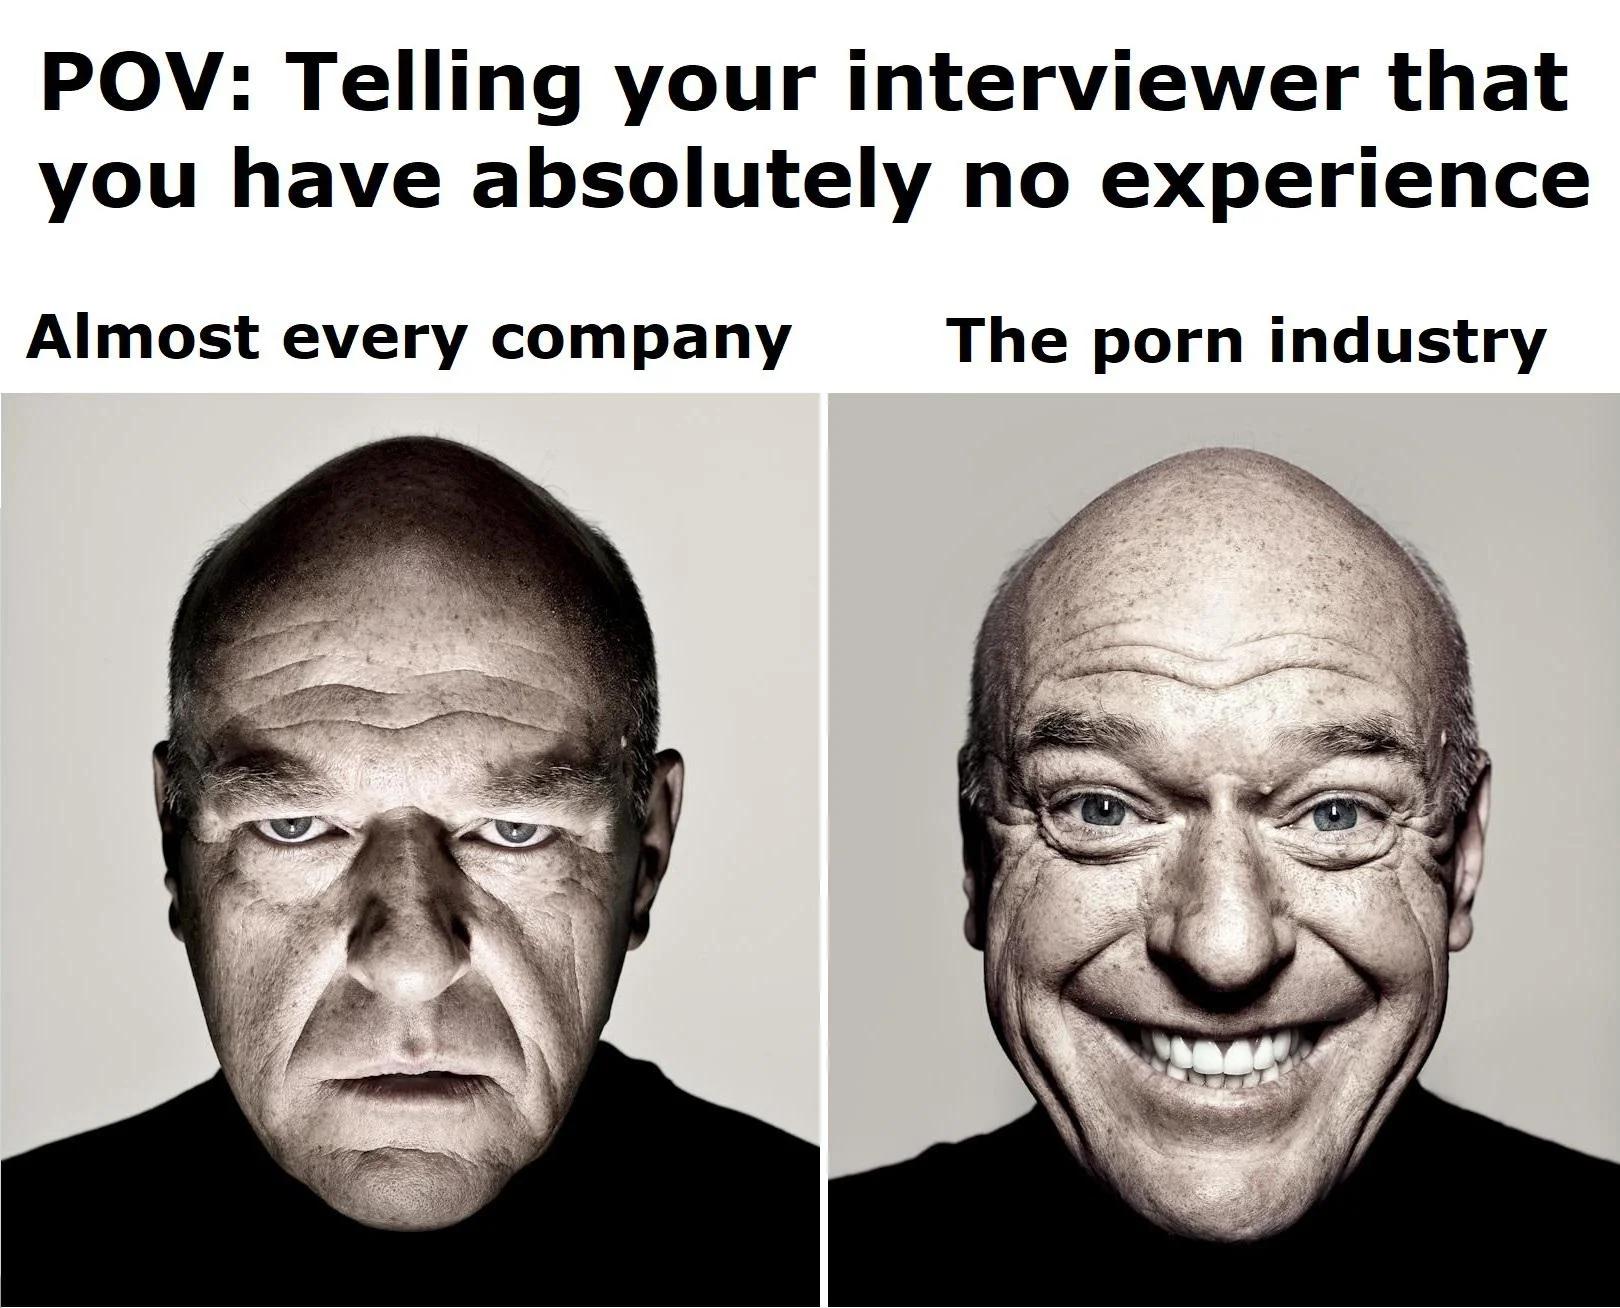 dank memes - hank breaking bad meme template - Pov Telling your interviewer that you have absolutely no experience Almost every company The porn industry